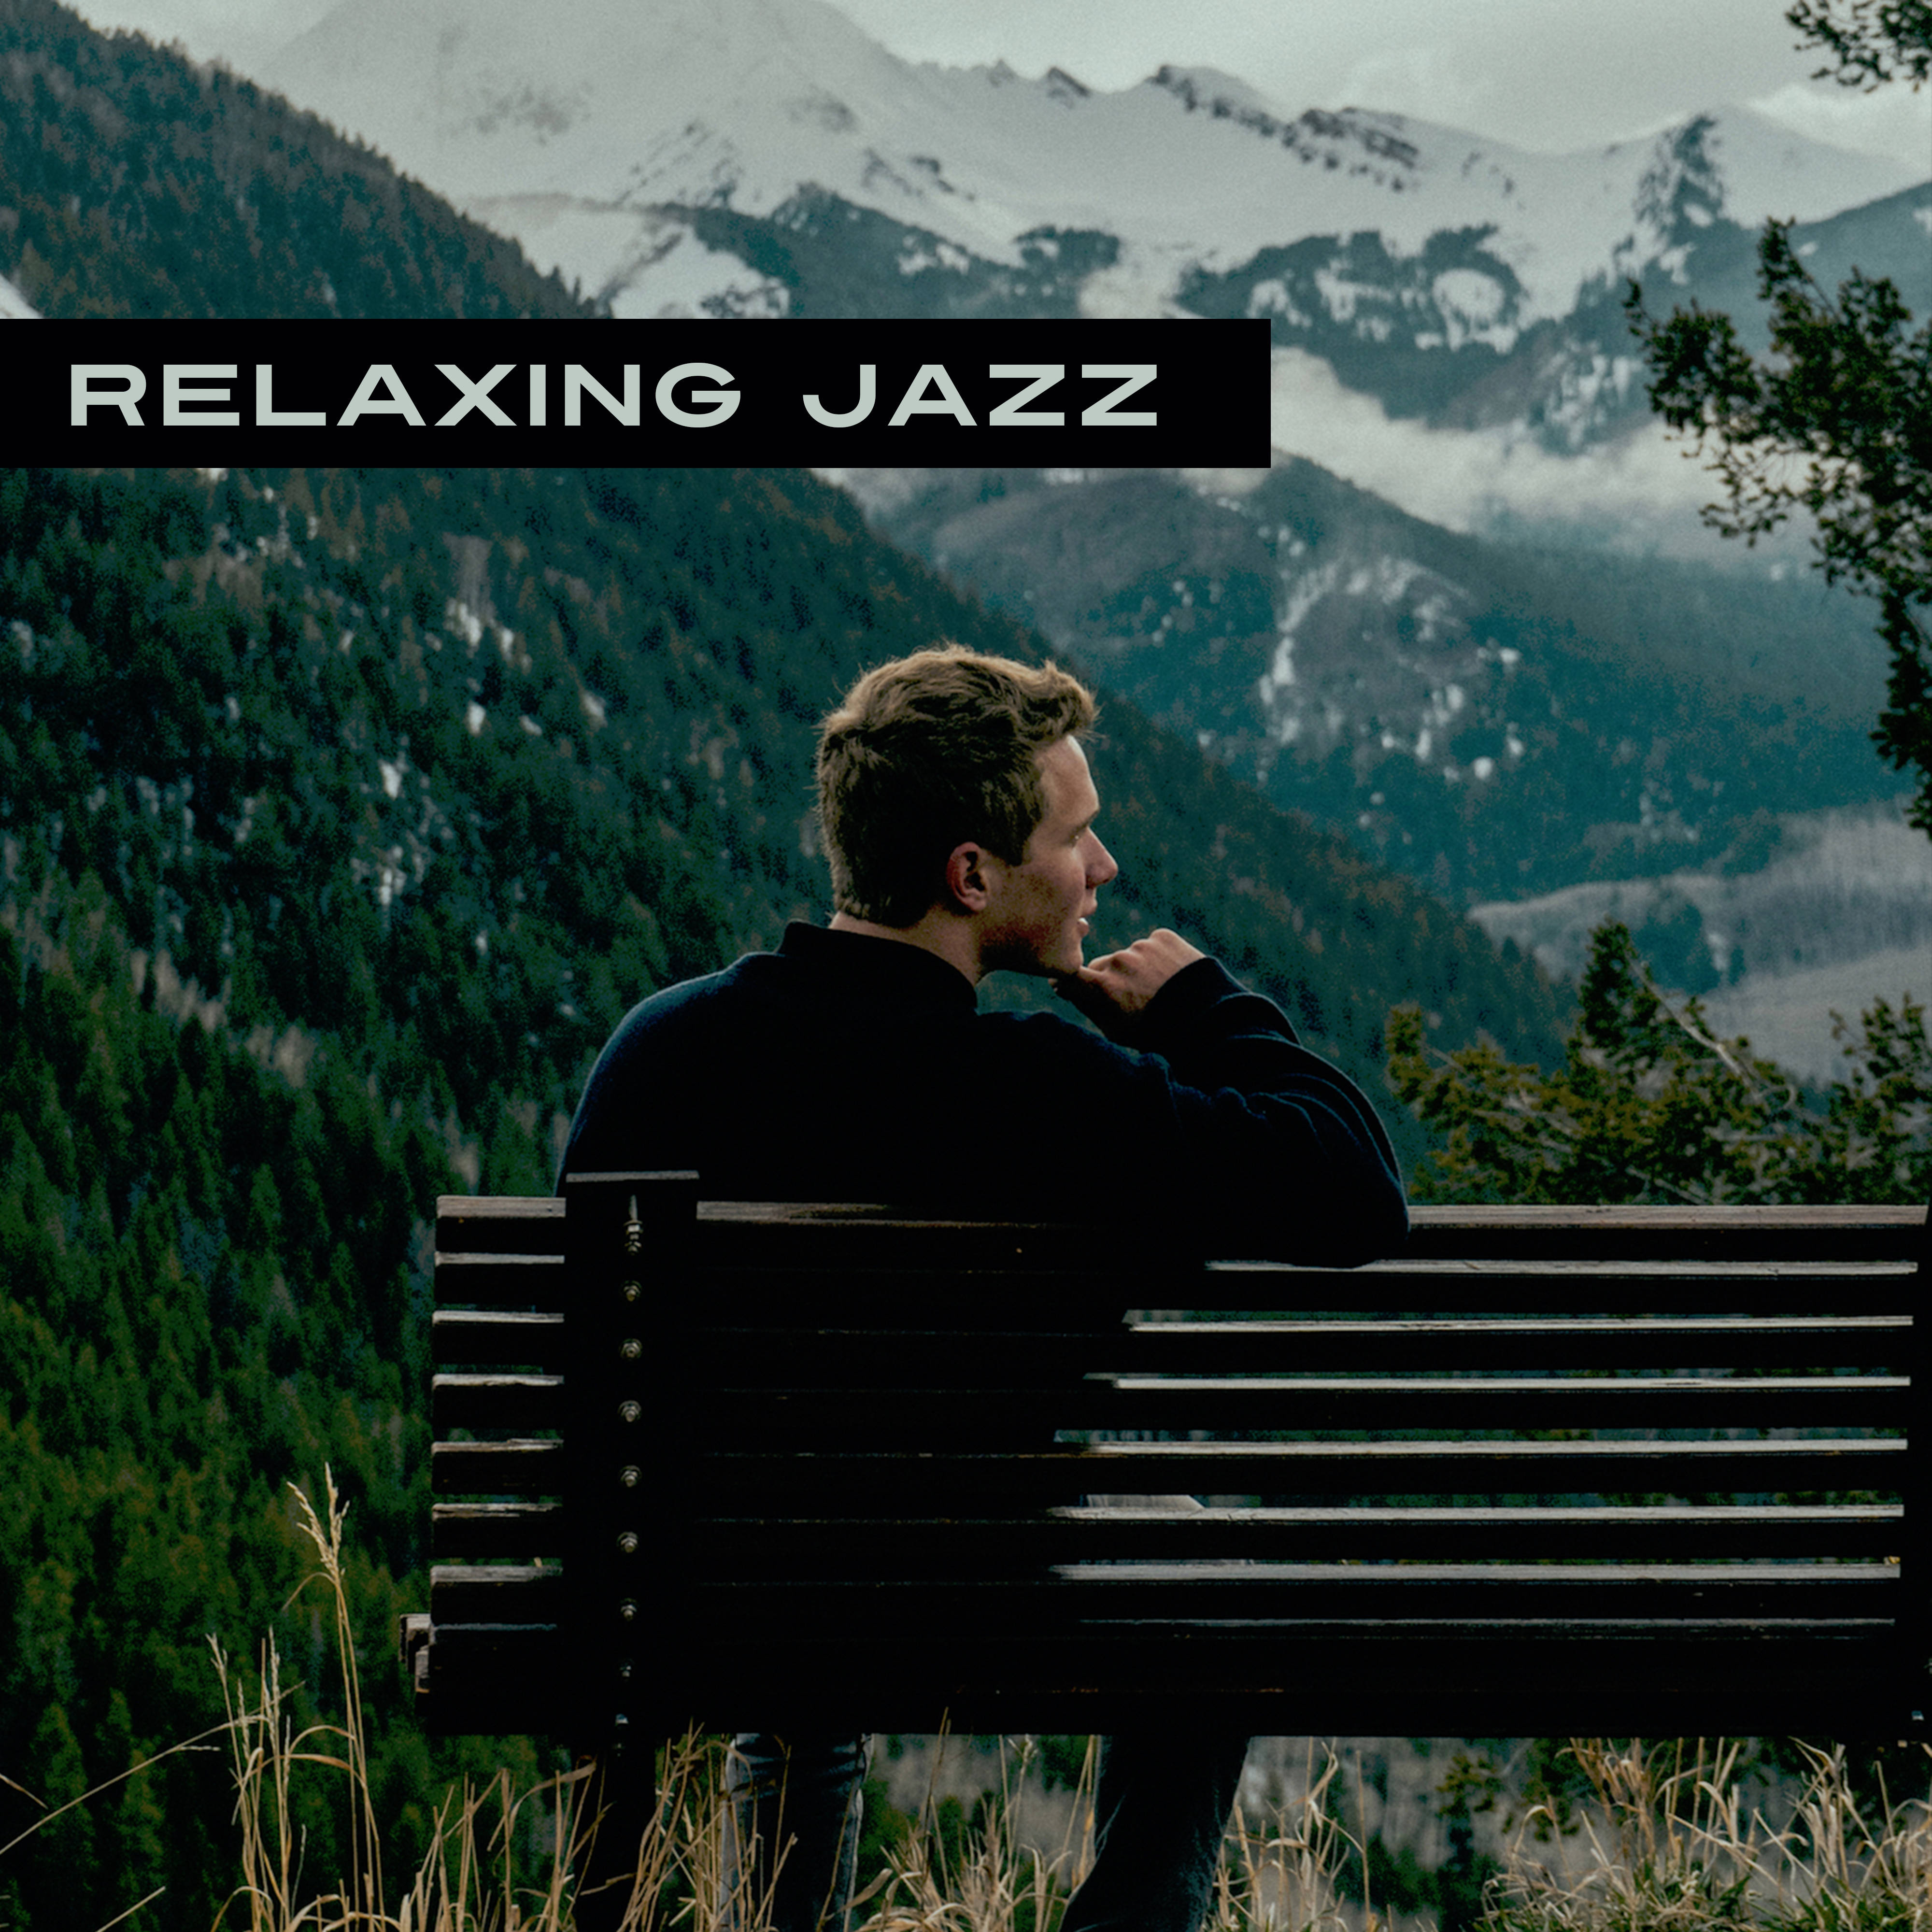 Relaxing Jazz  Calming Instruments for Healing, Rest, Pure Relaxation, Chilled Jazz, Soothing Guitar, Genle Piano, Relaxed Mind, Night Music